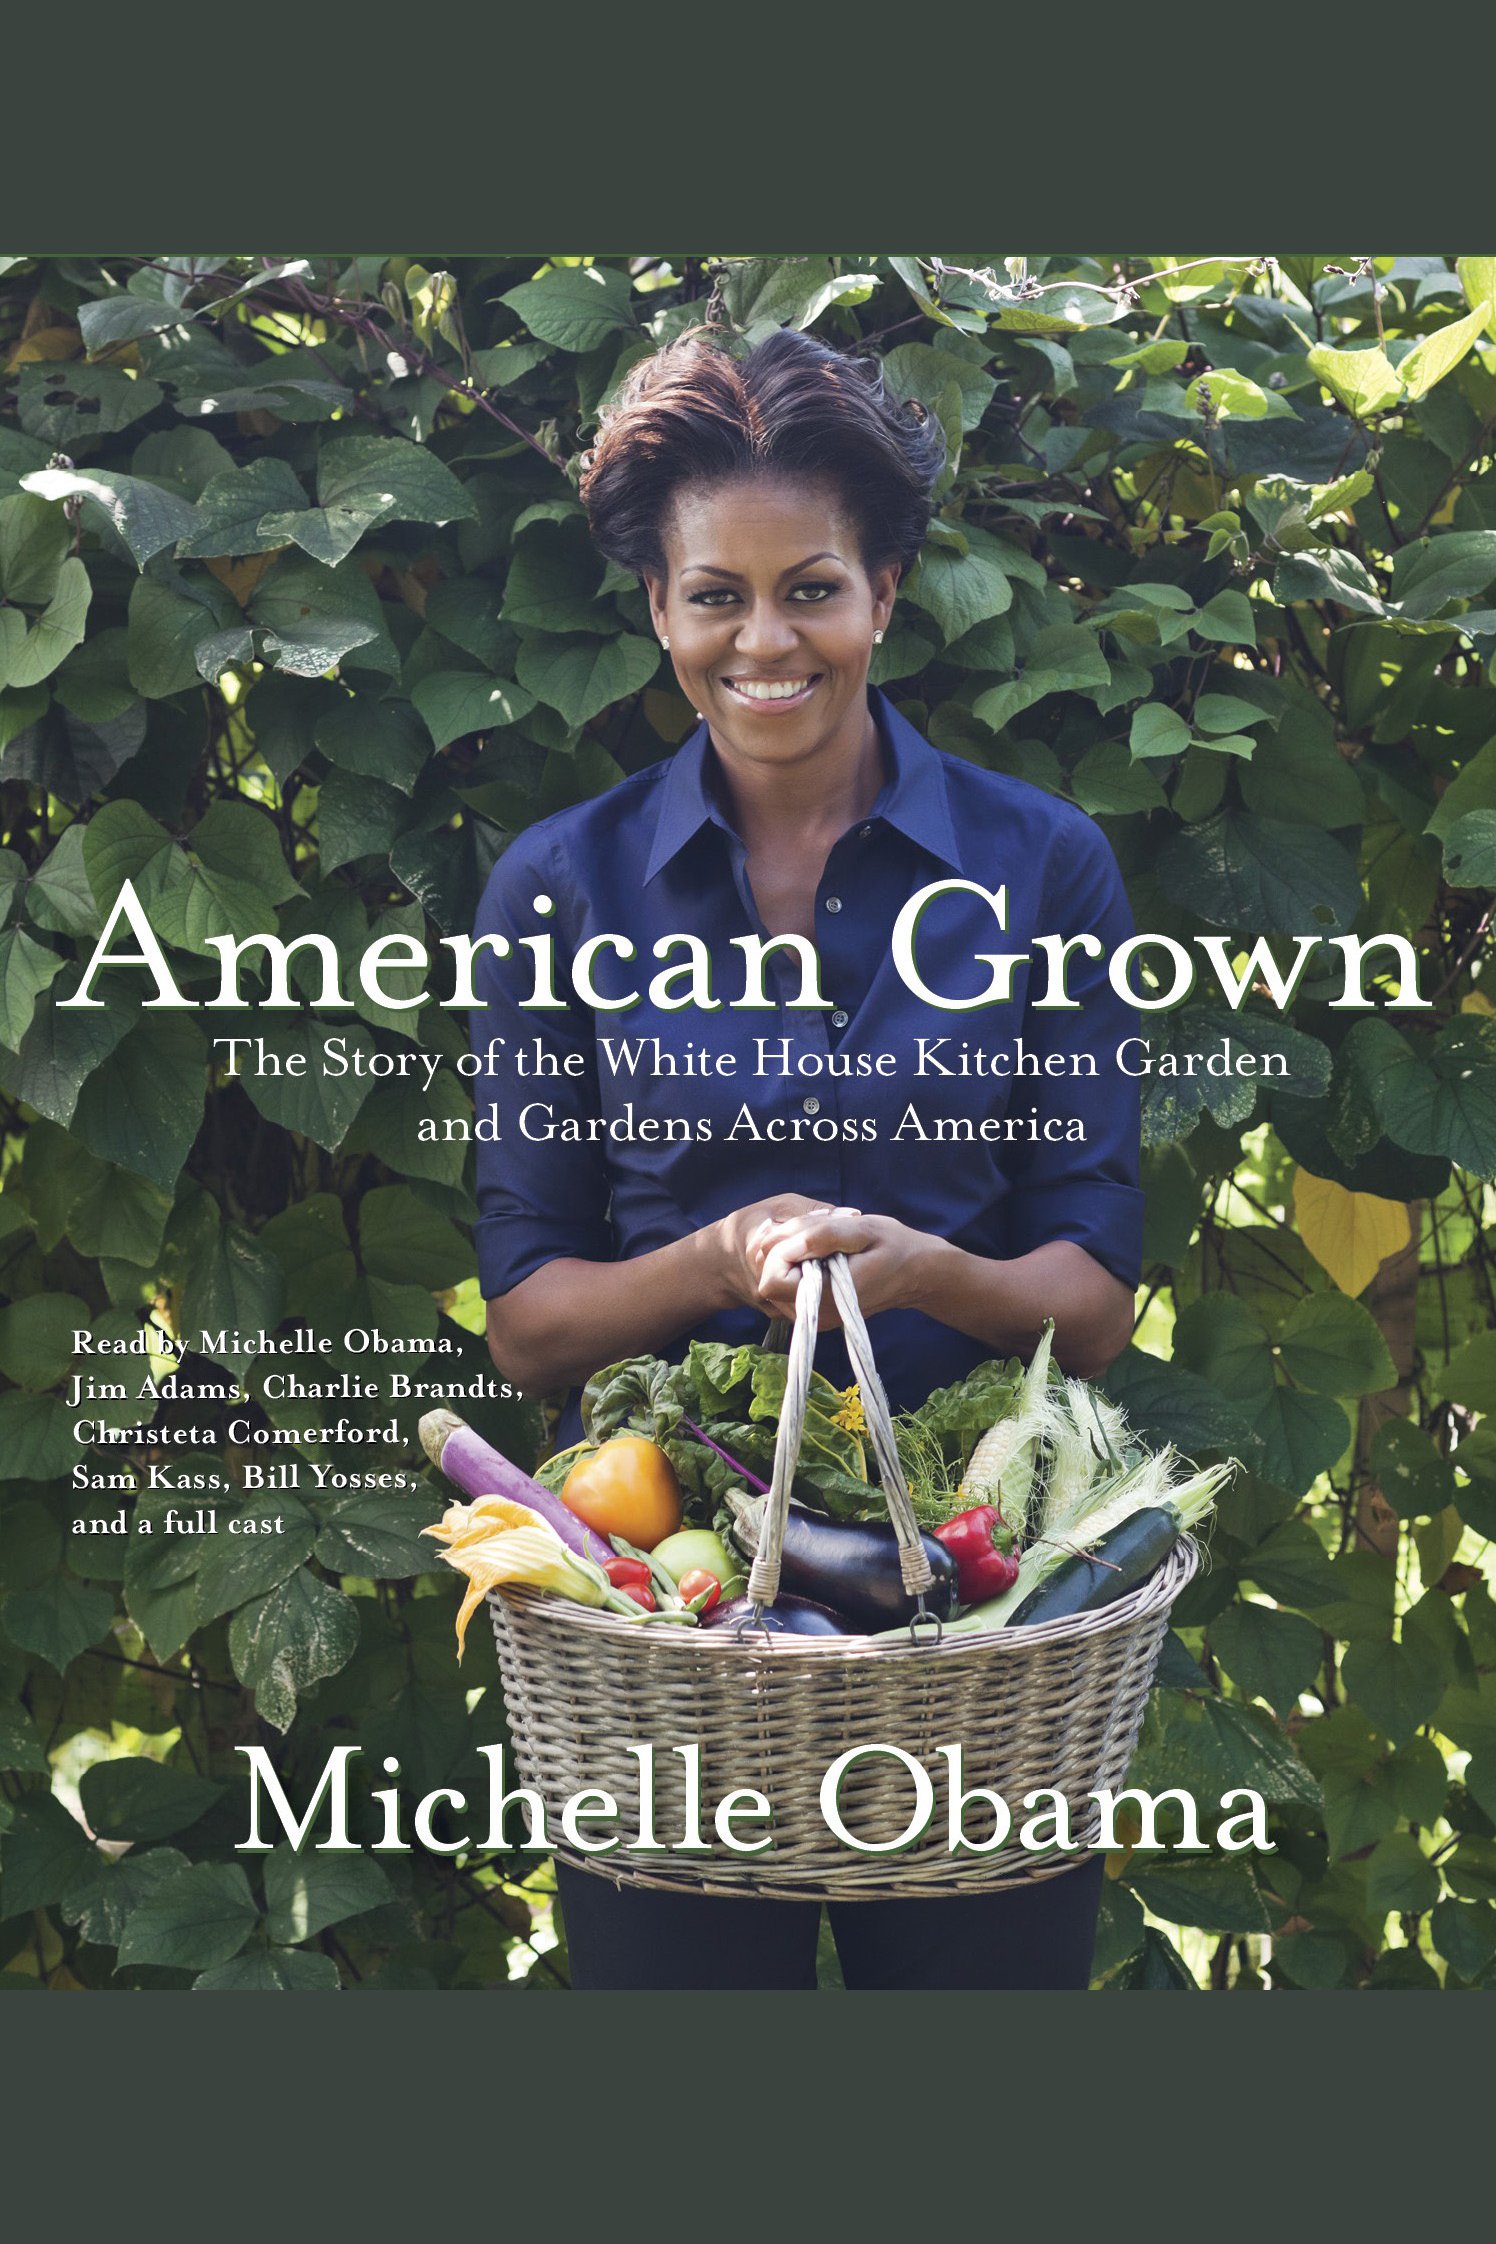 American grown the story of the White House kitchen garden and gardens across America cover image